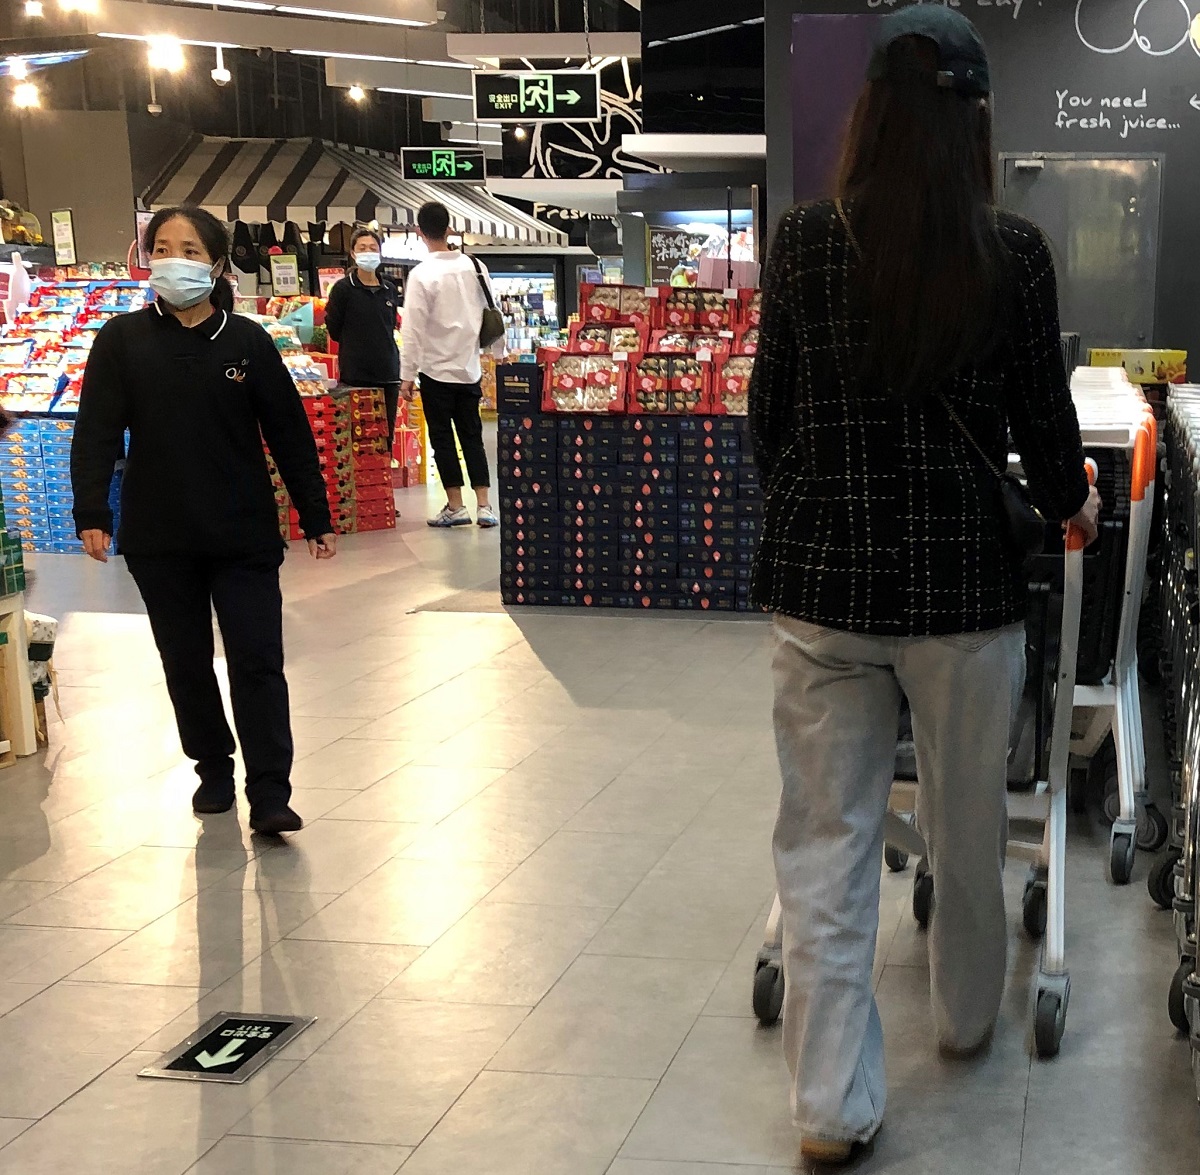 What makes Superhii smart shopping trolley more efficient for retailers?